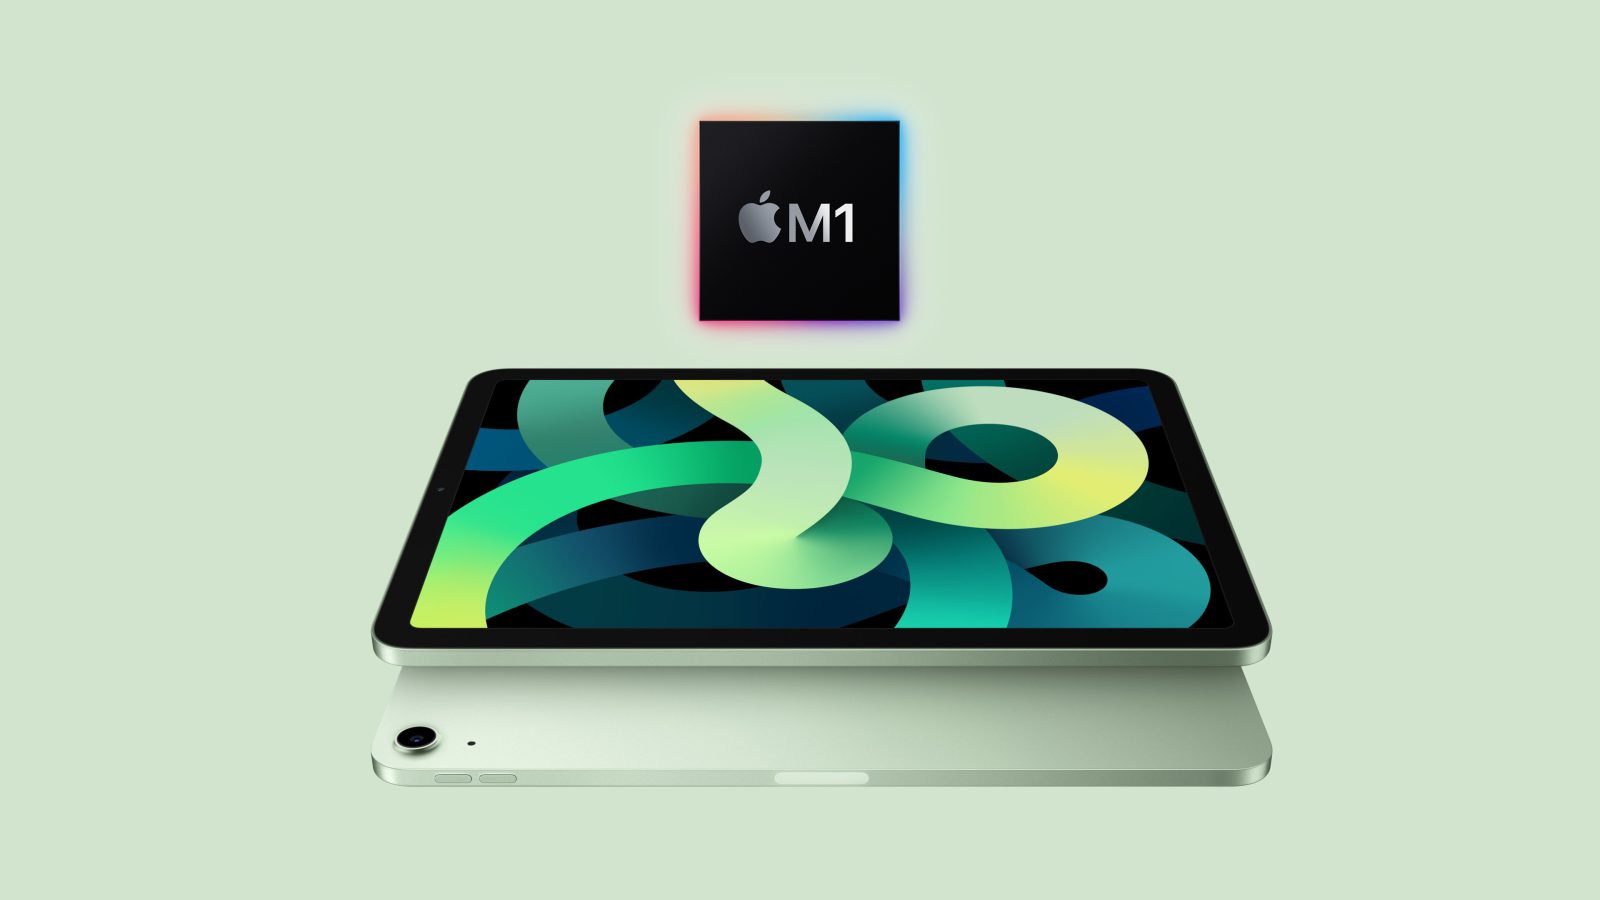 Exclusive: iPad Air 5 to match iPad Pro performance with M1 - 9to5Mac